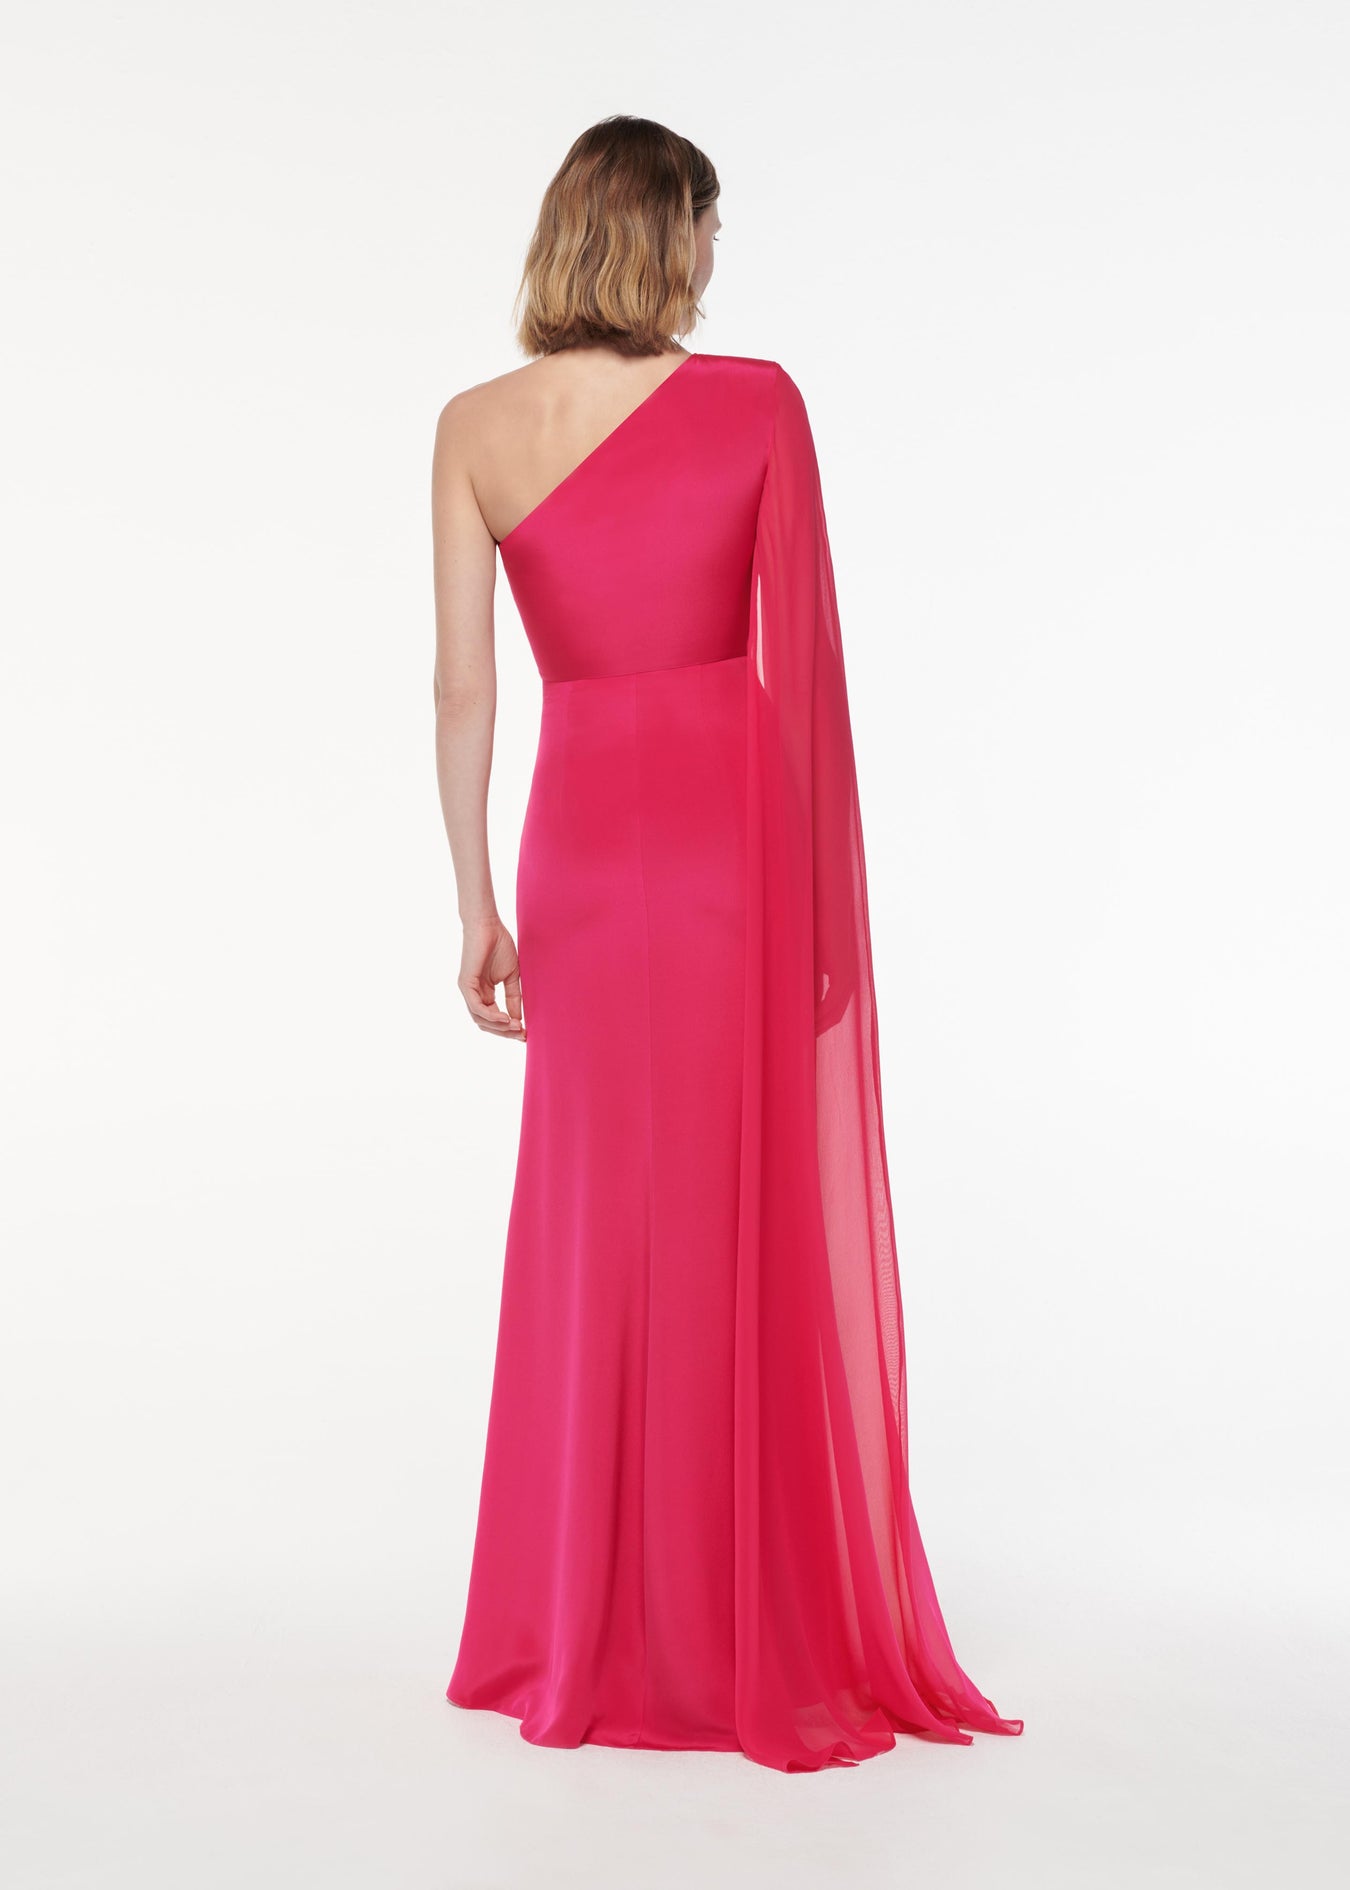 A photograph of a woman wearing a Asymmetric Silk Gown in Pink